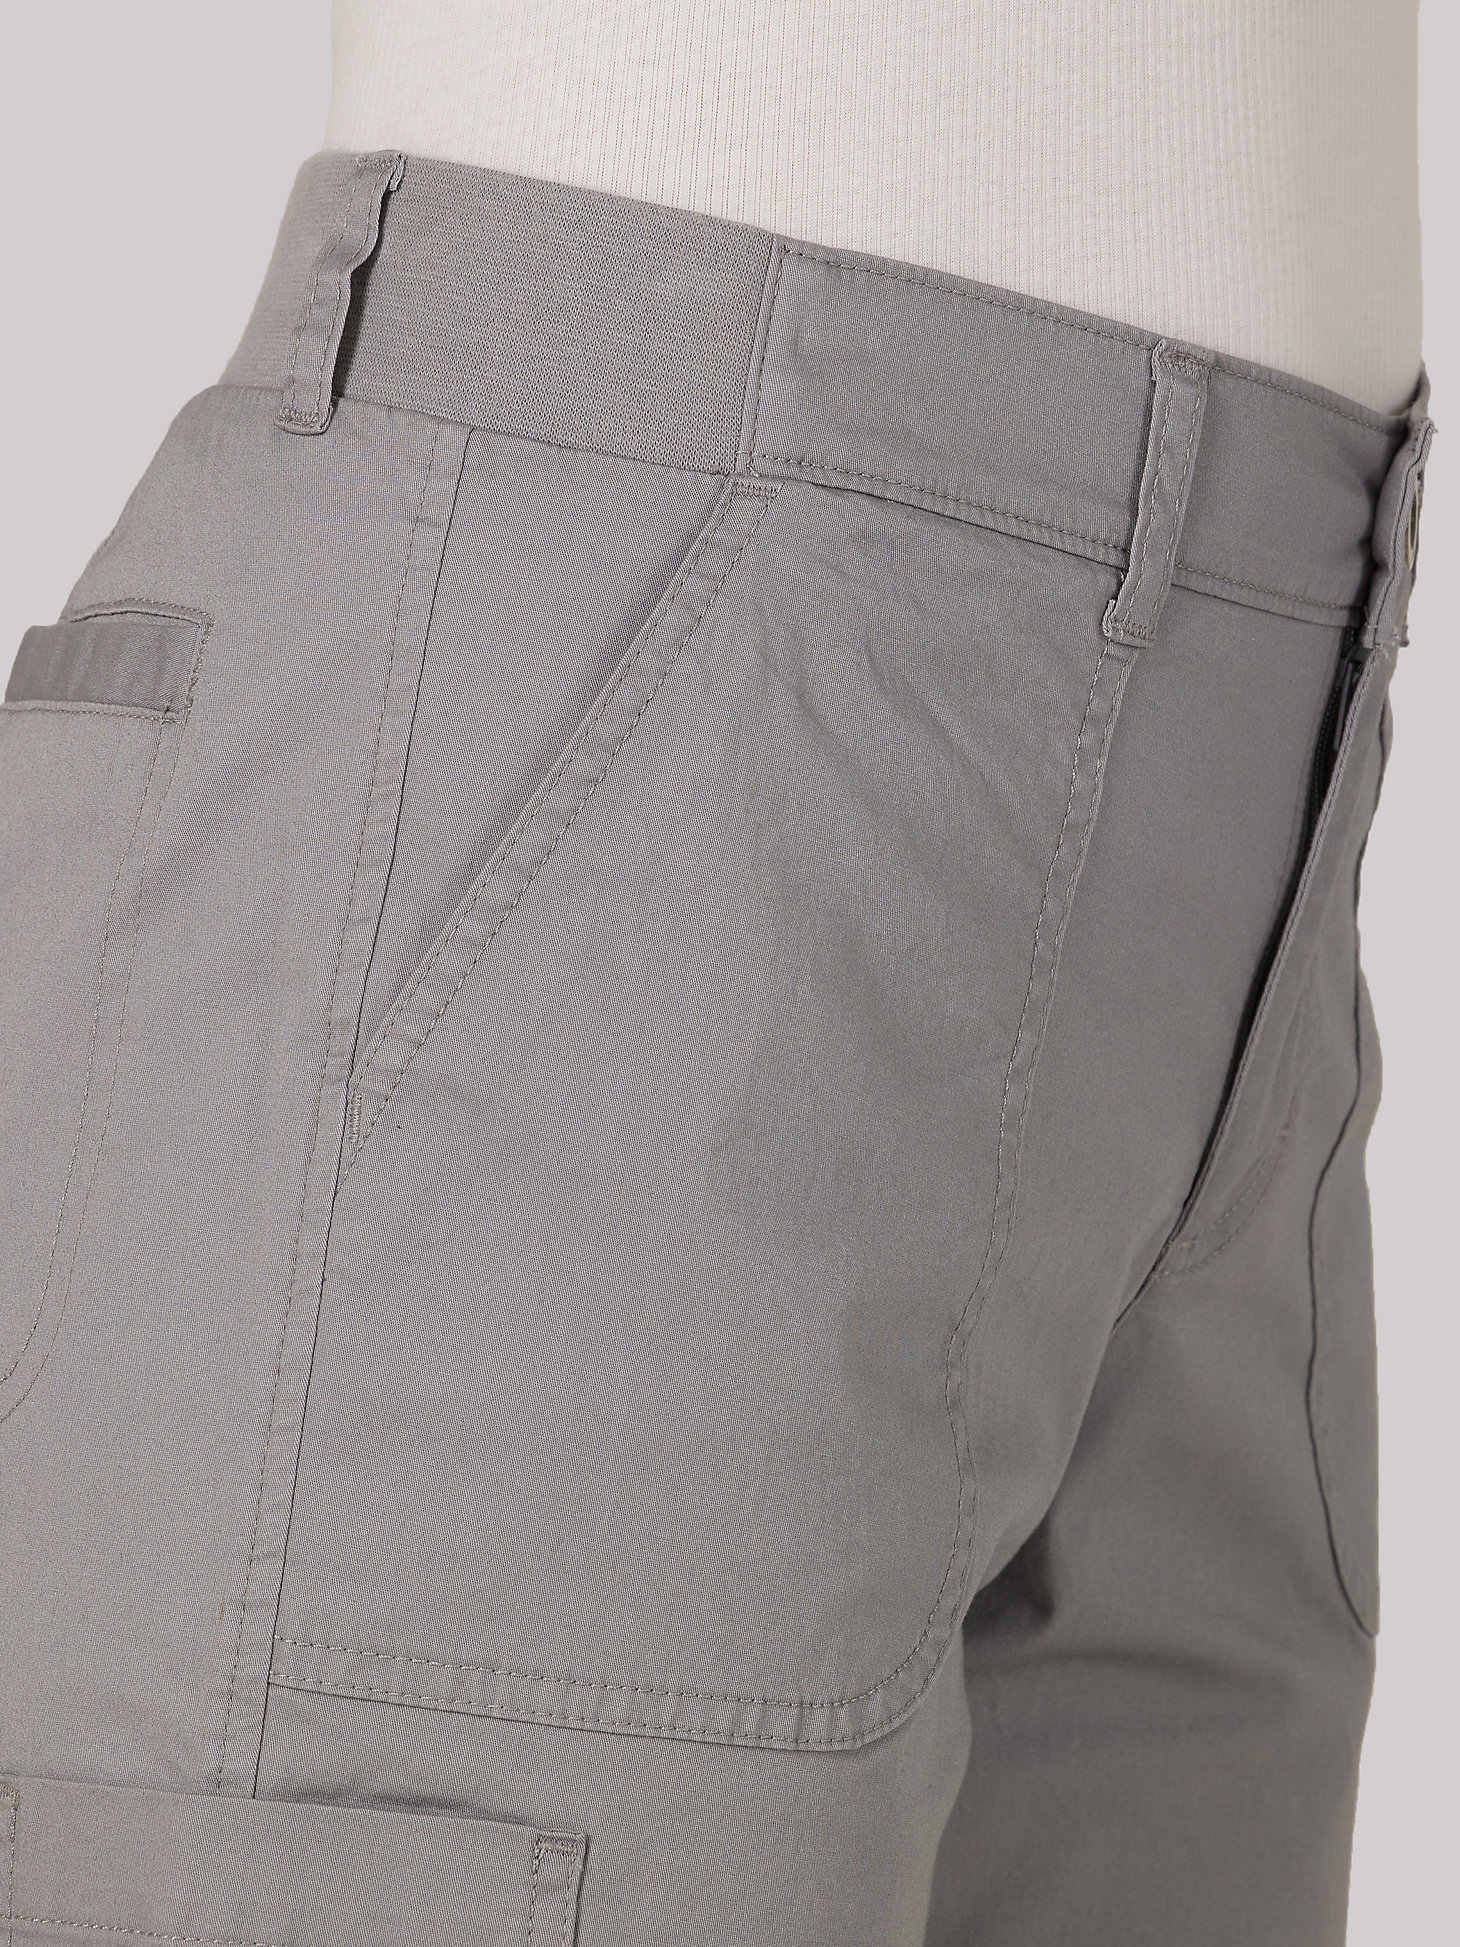 Women's Flex-to-Go Relaxed Fit Cargo Bermuda (Petite) in New Gray alternative view 3